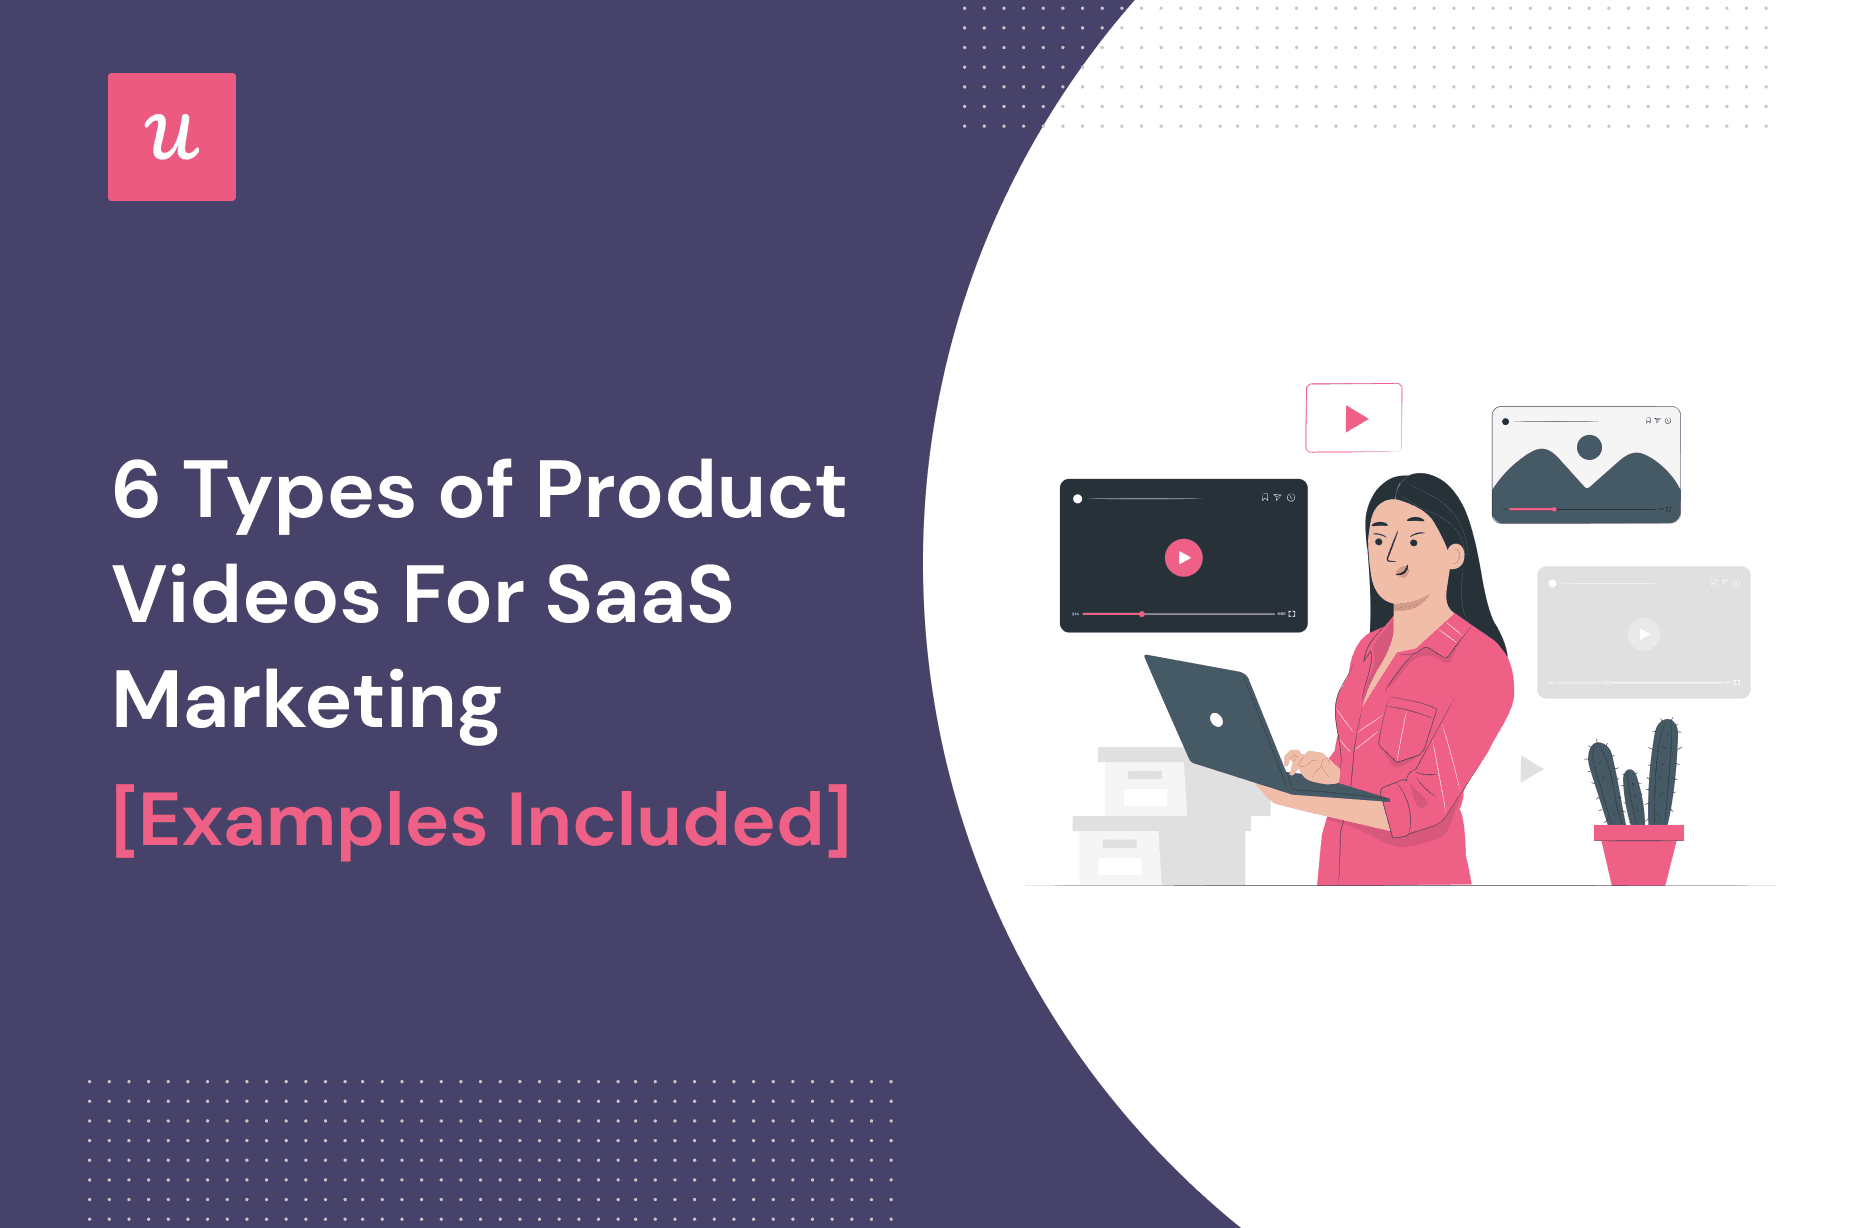 Product Videos for Marketing SaaS [Examples Included]